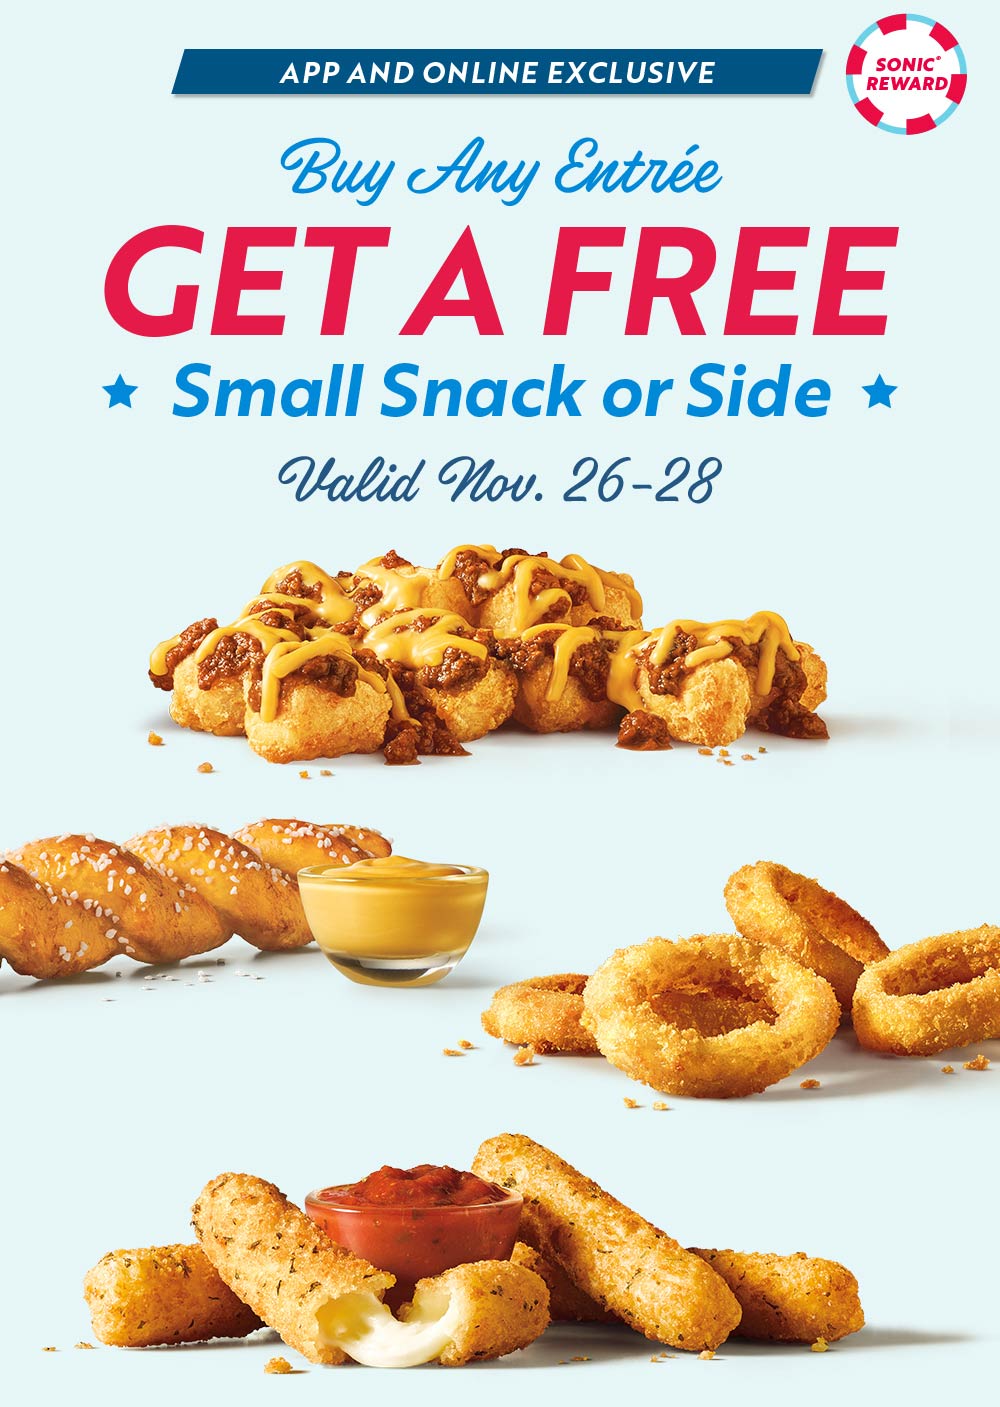 Sonic Drive-In restaurants Coupon  Free side with your entree at Sonic Drive-In #sonicdrivein 